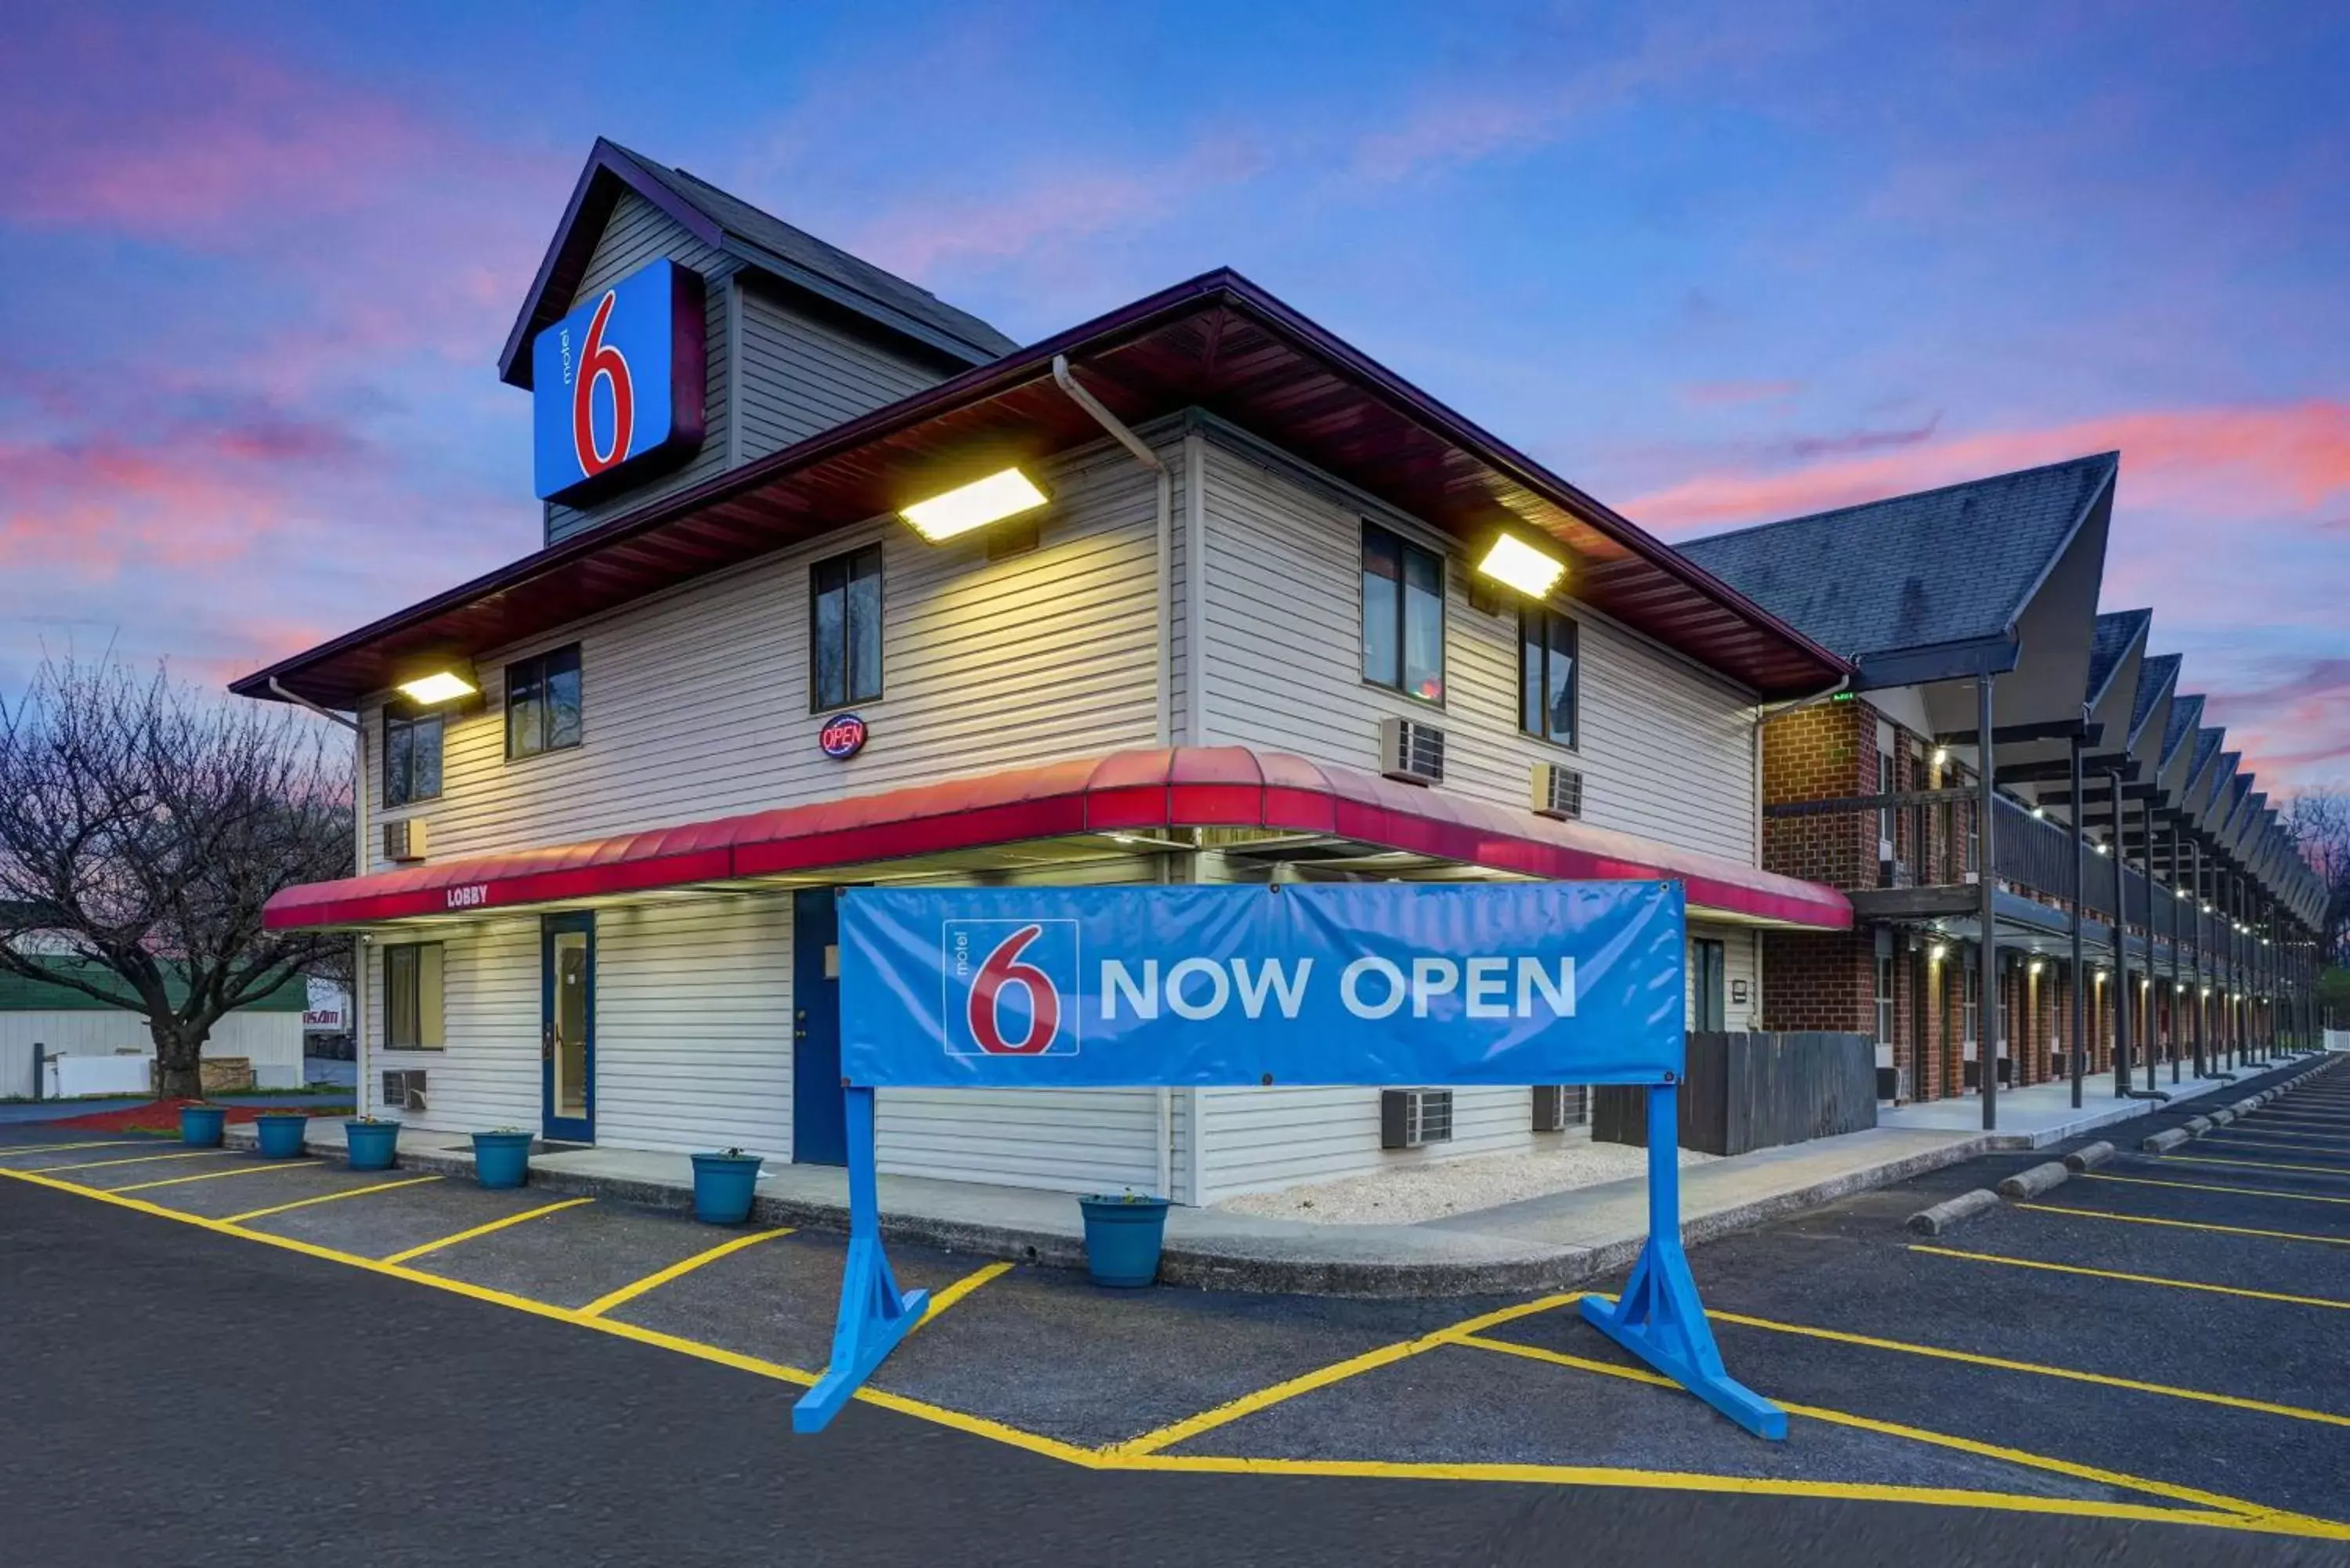 Property building in Motel 6 Carlisle, PA - Cumberland Valley